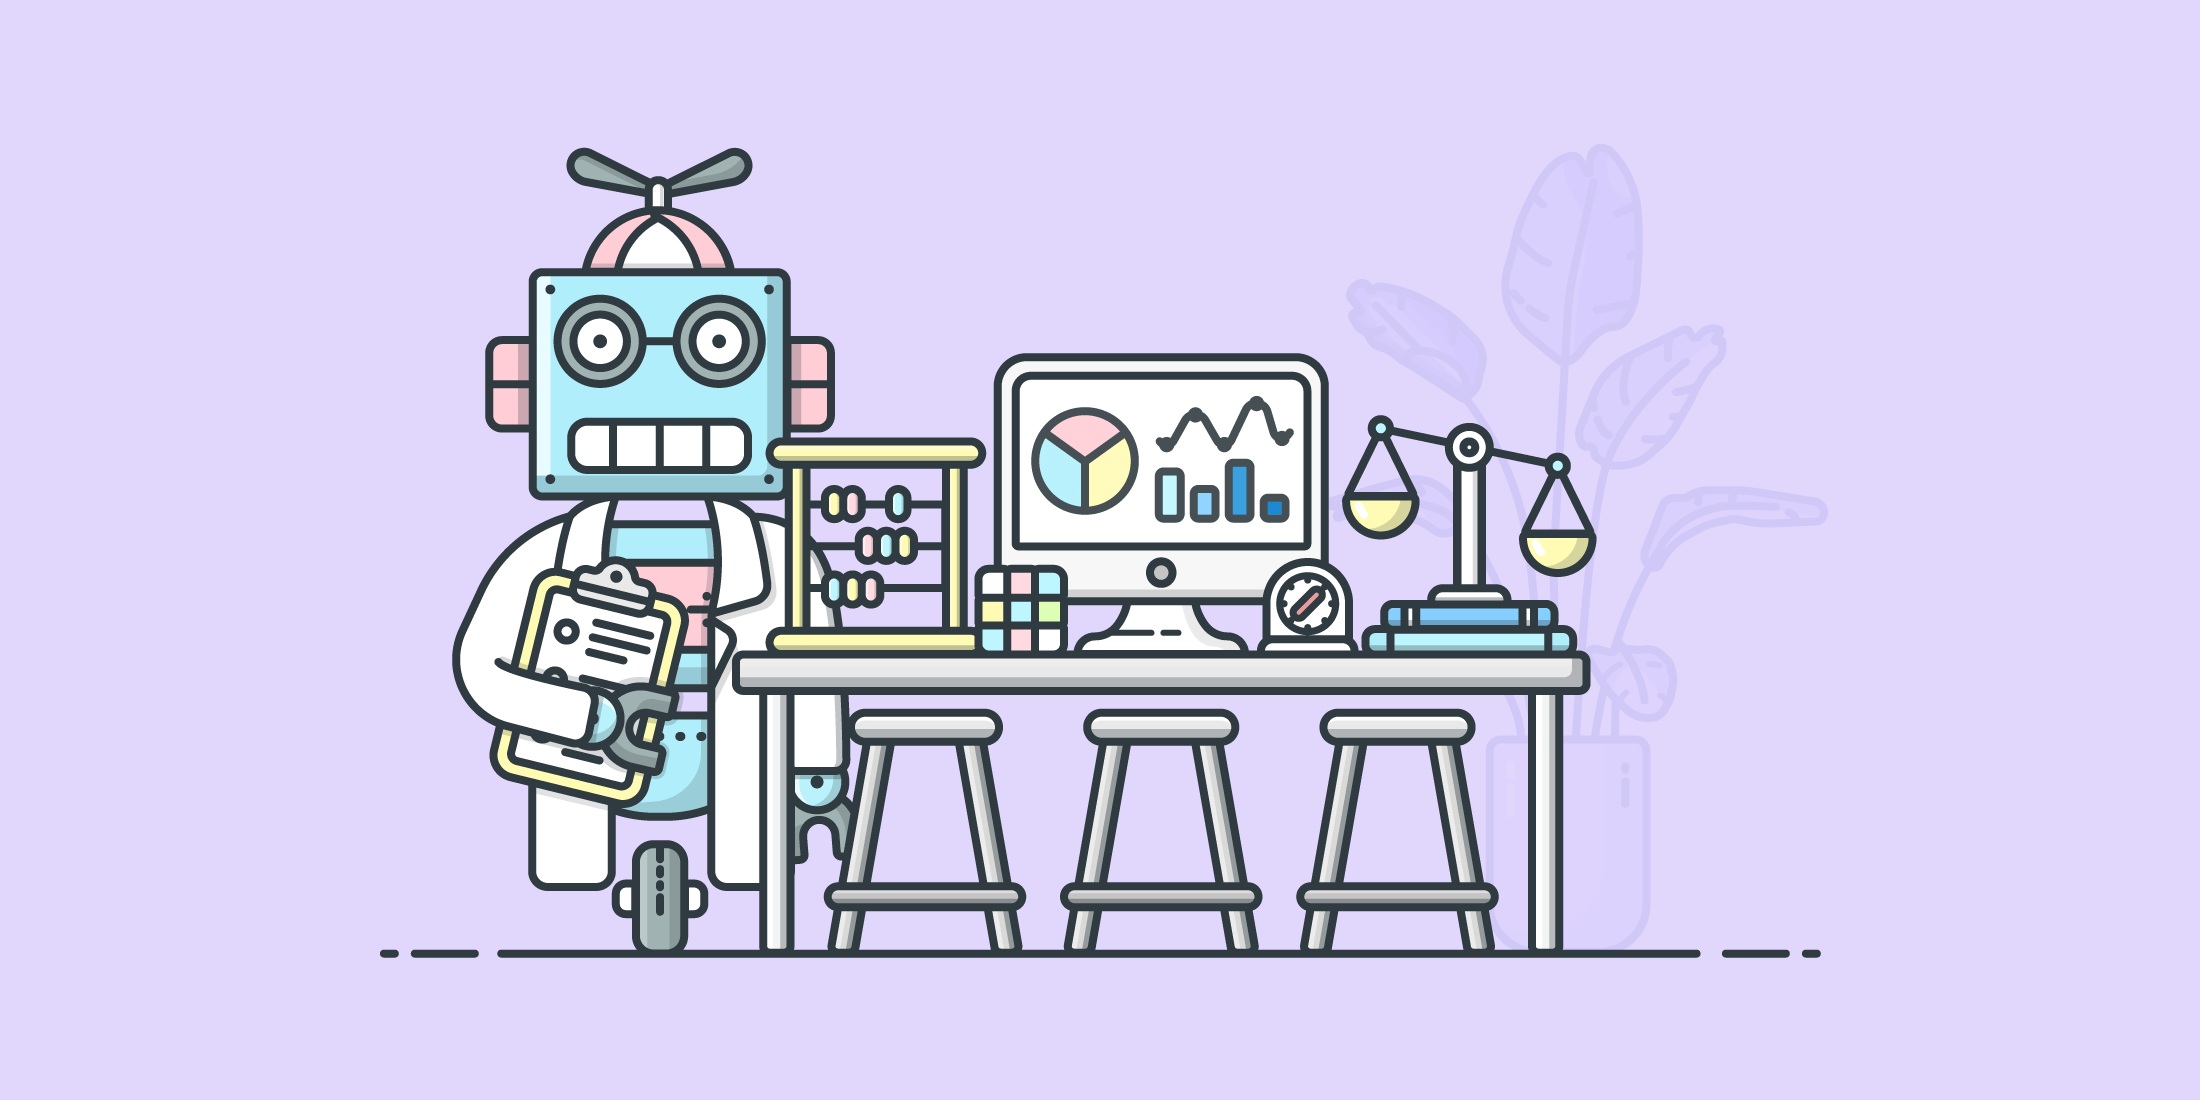 Illustration of a robot with scientific instruments